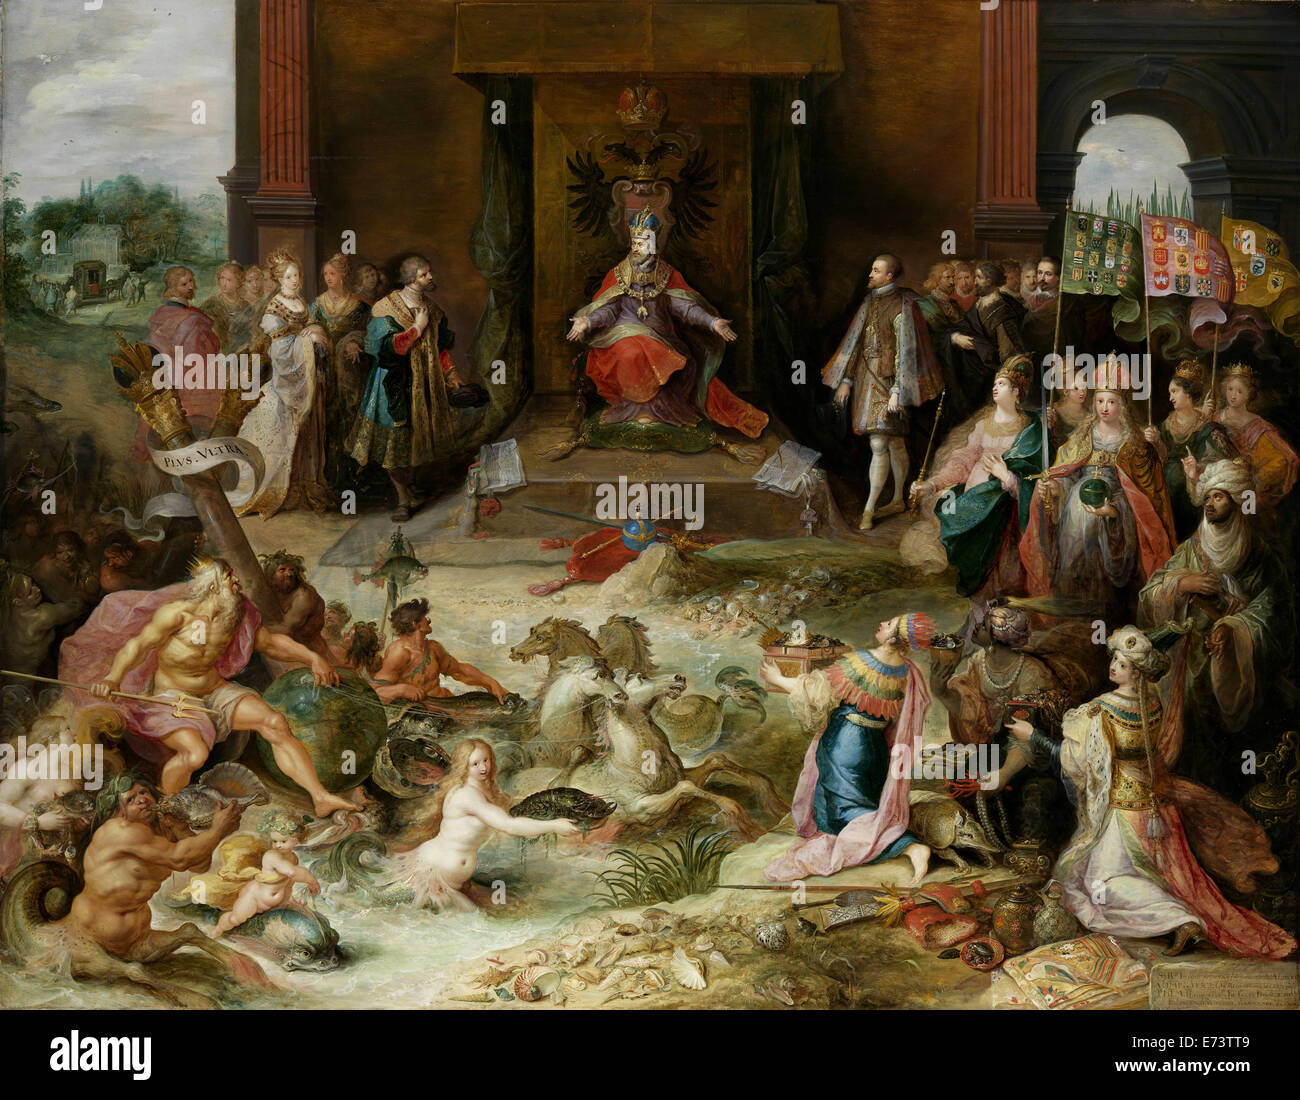 Allegory on the Abdication of Emperor Charles V in Brussels - by Frans Francken, 1630 - 1640 Stock Photo